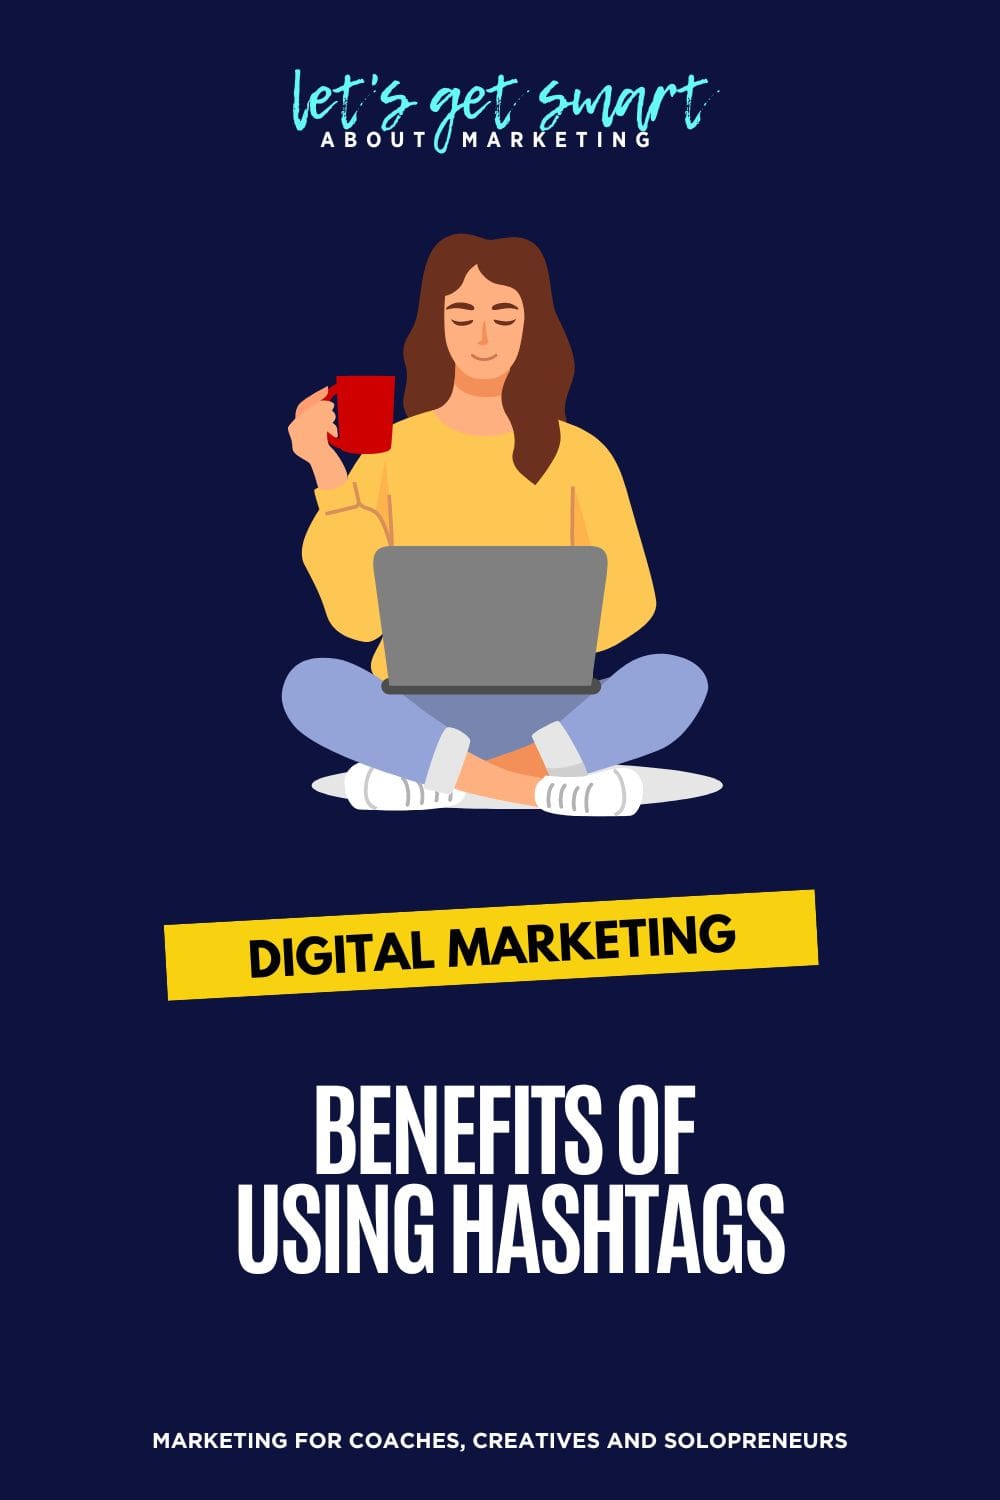 Are Hashtags Still Relevant? A Digital Marketer's Guide